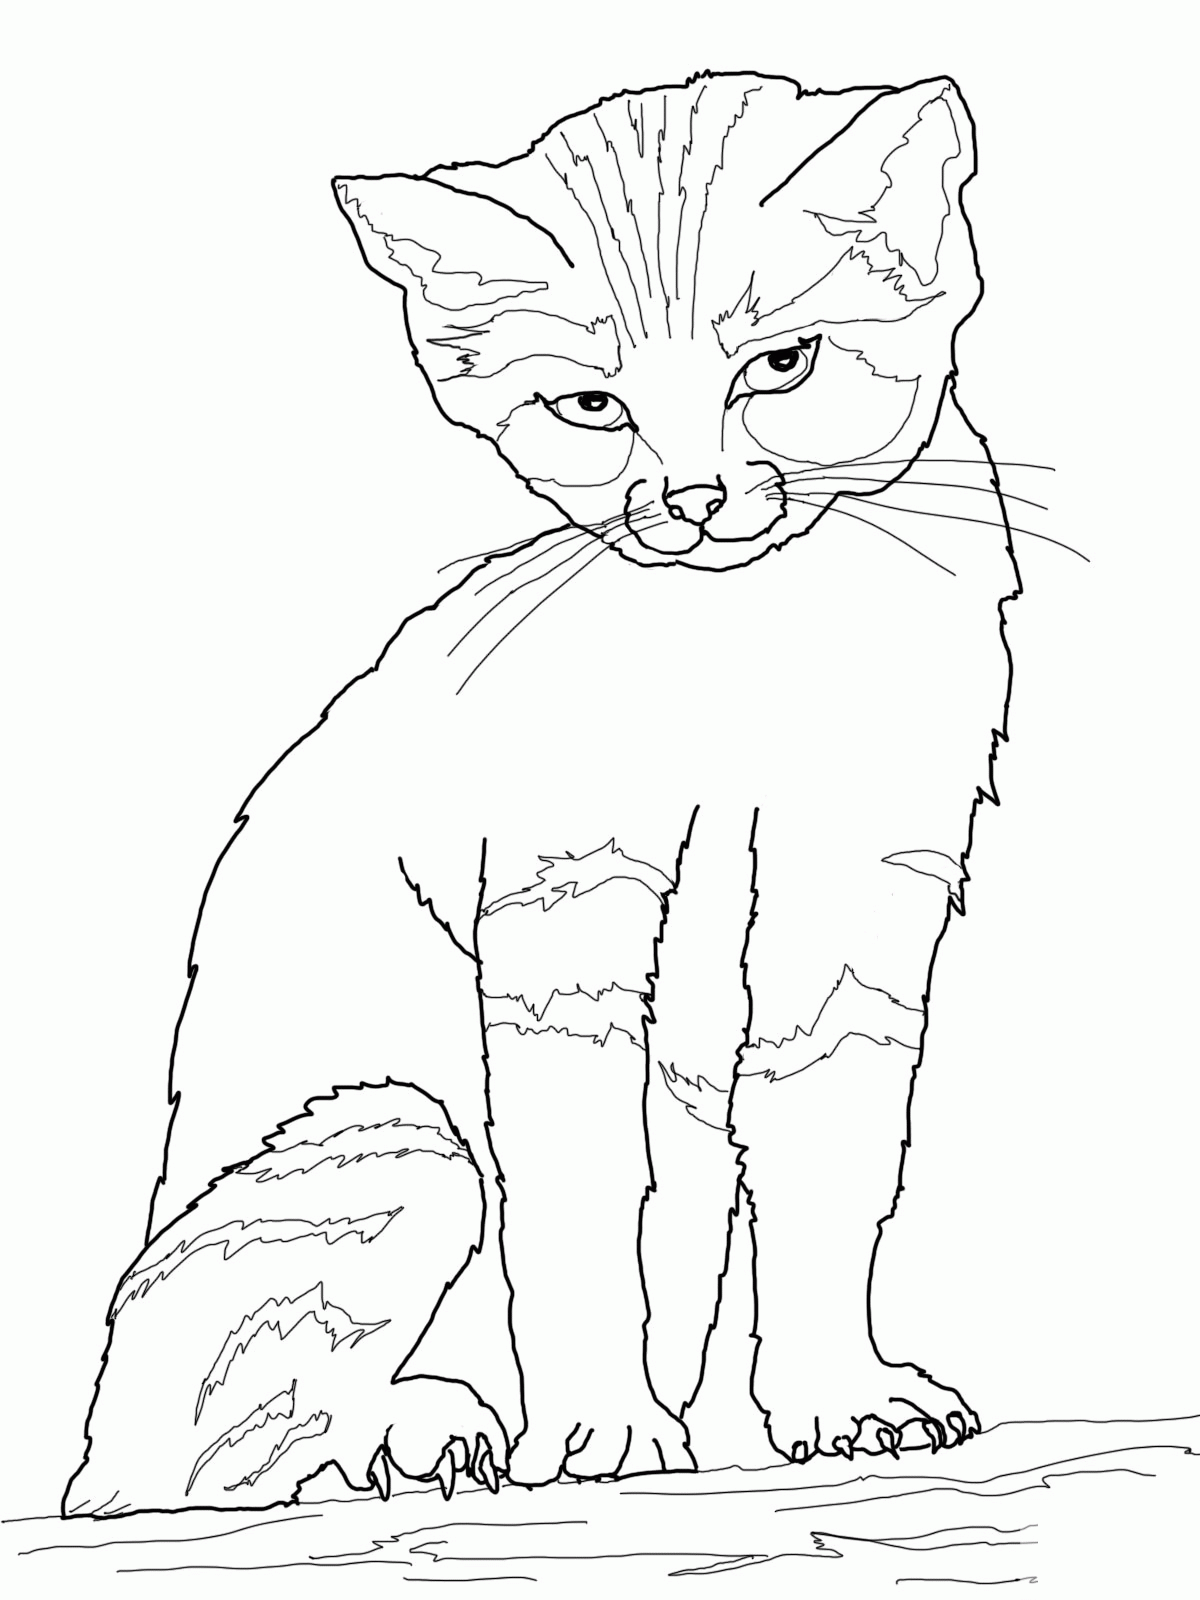 Male Cat Coloring Pages For Kid | Coloring.Cosplaypic.com